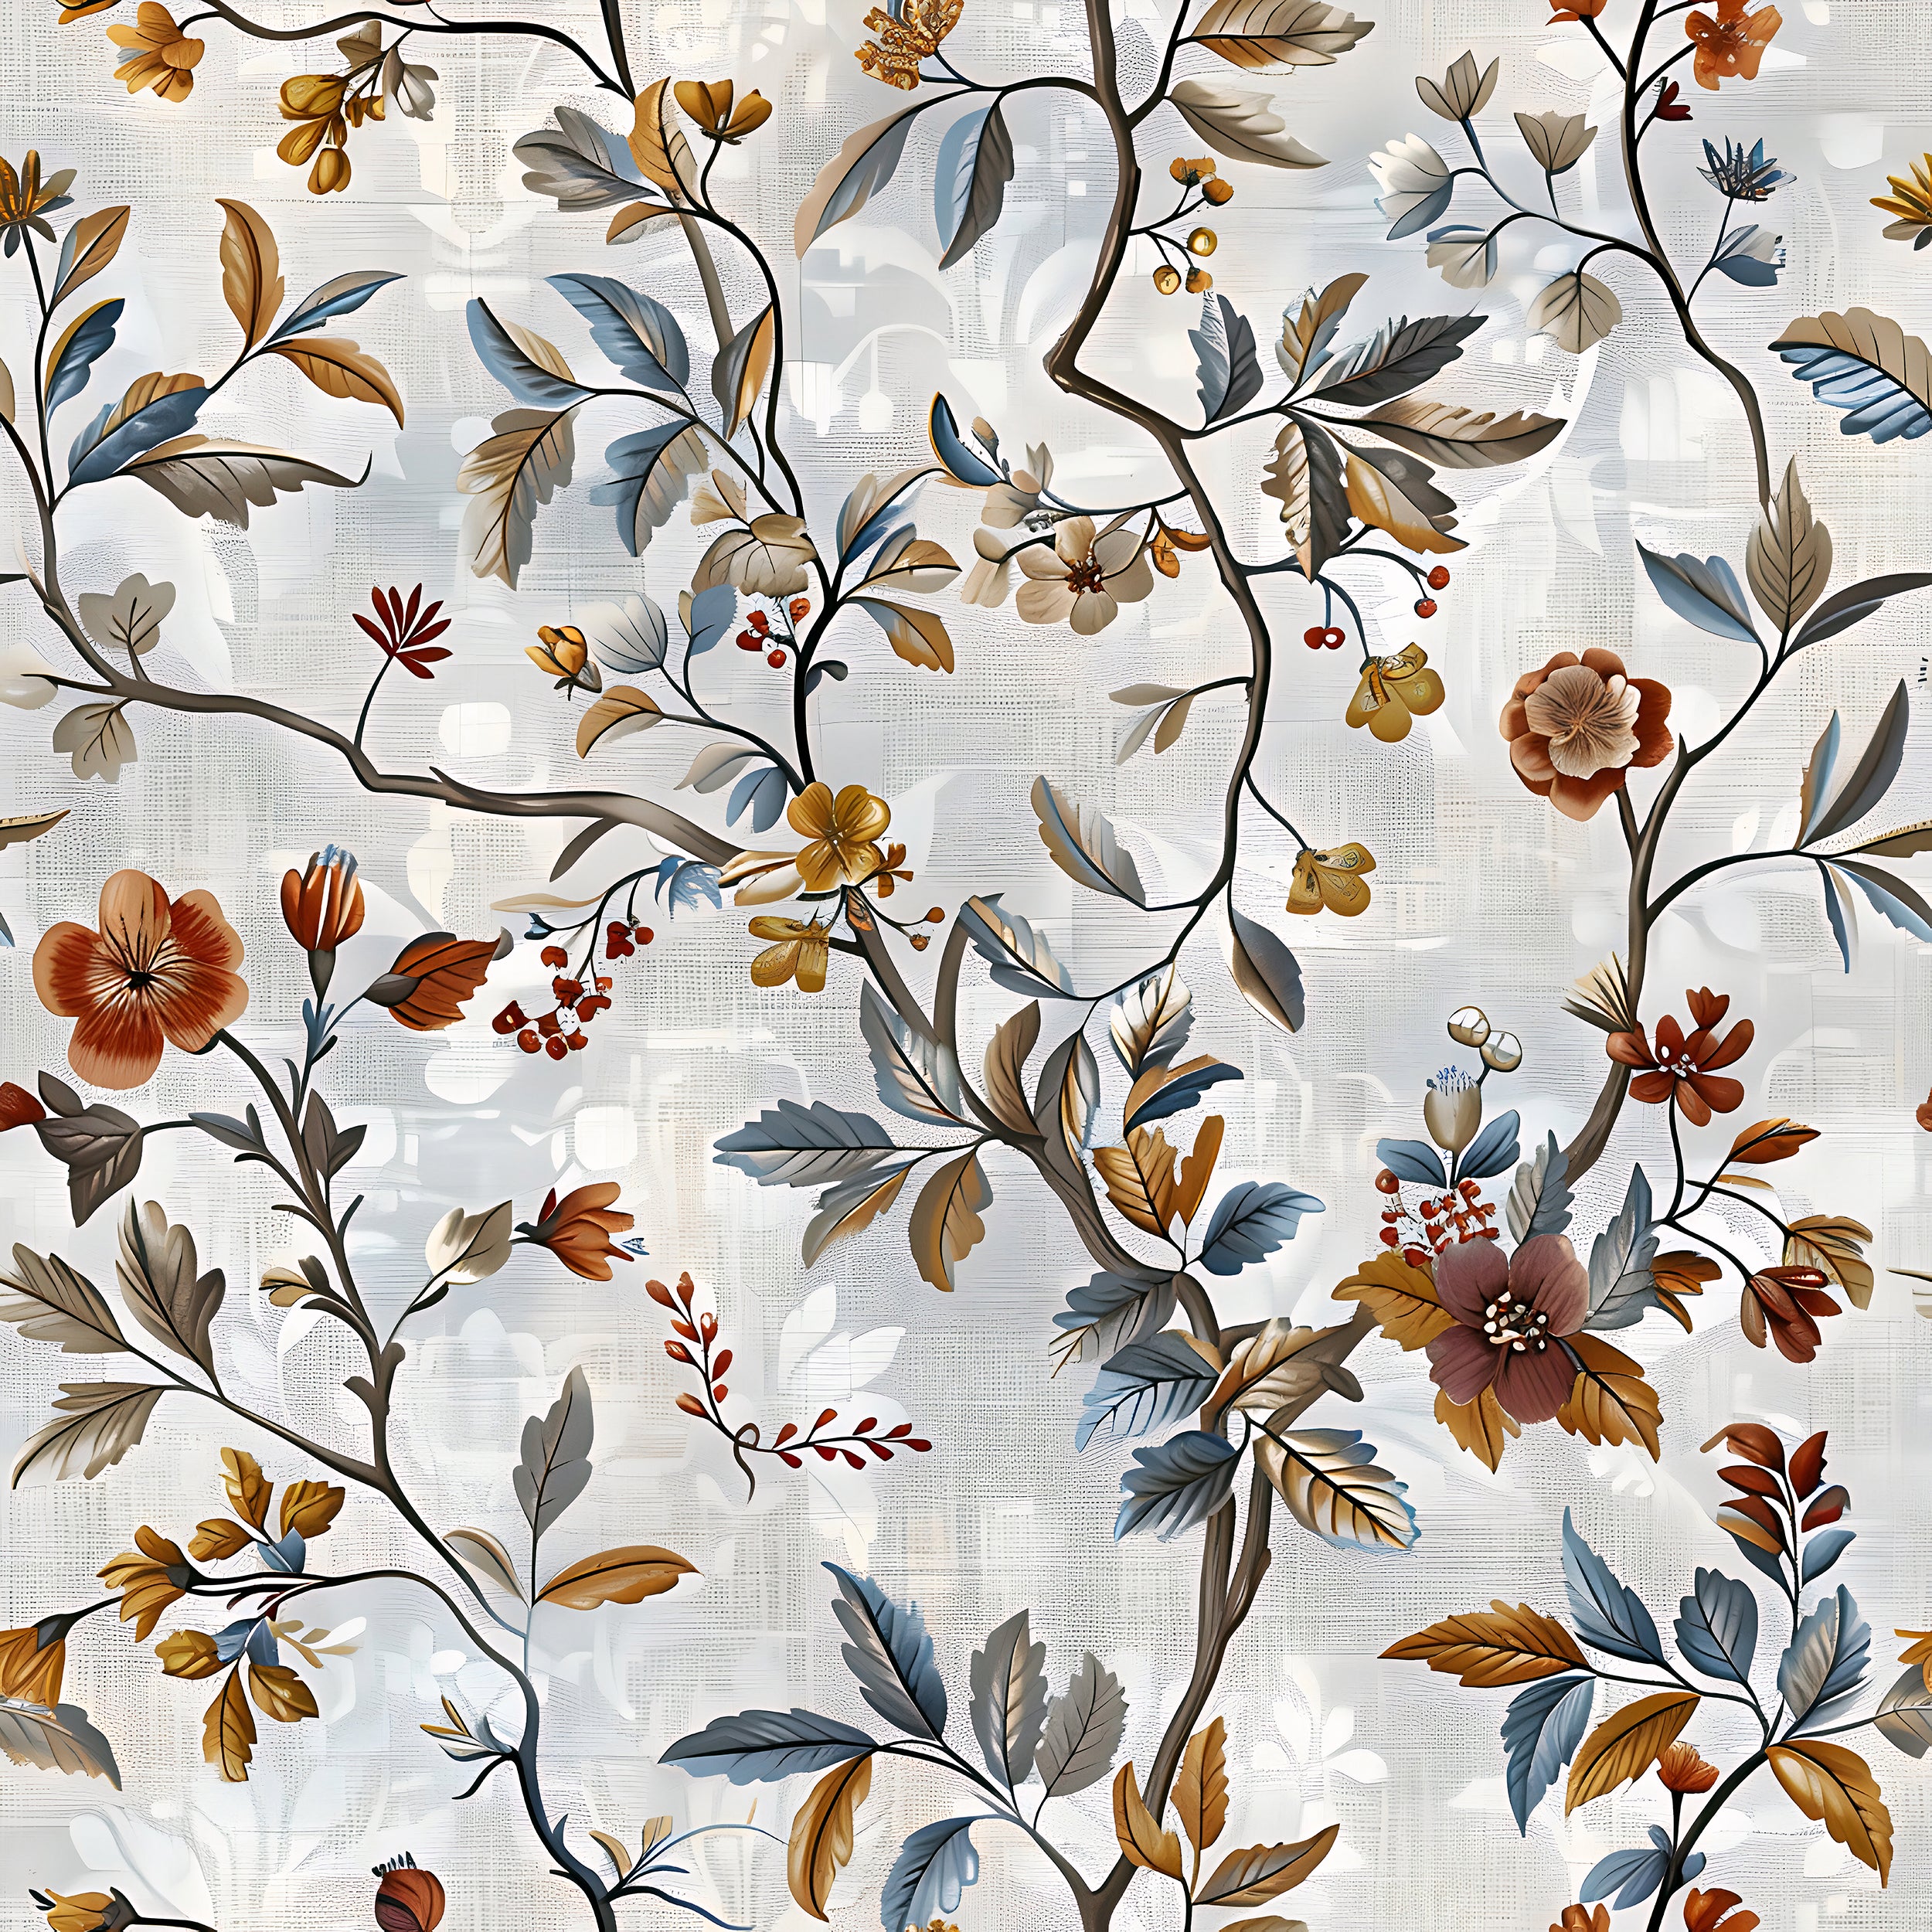 Peel and stick floral wallpaper